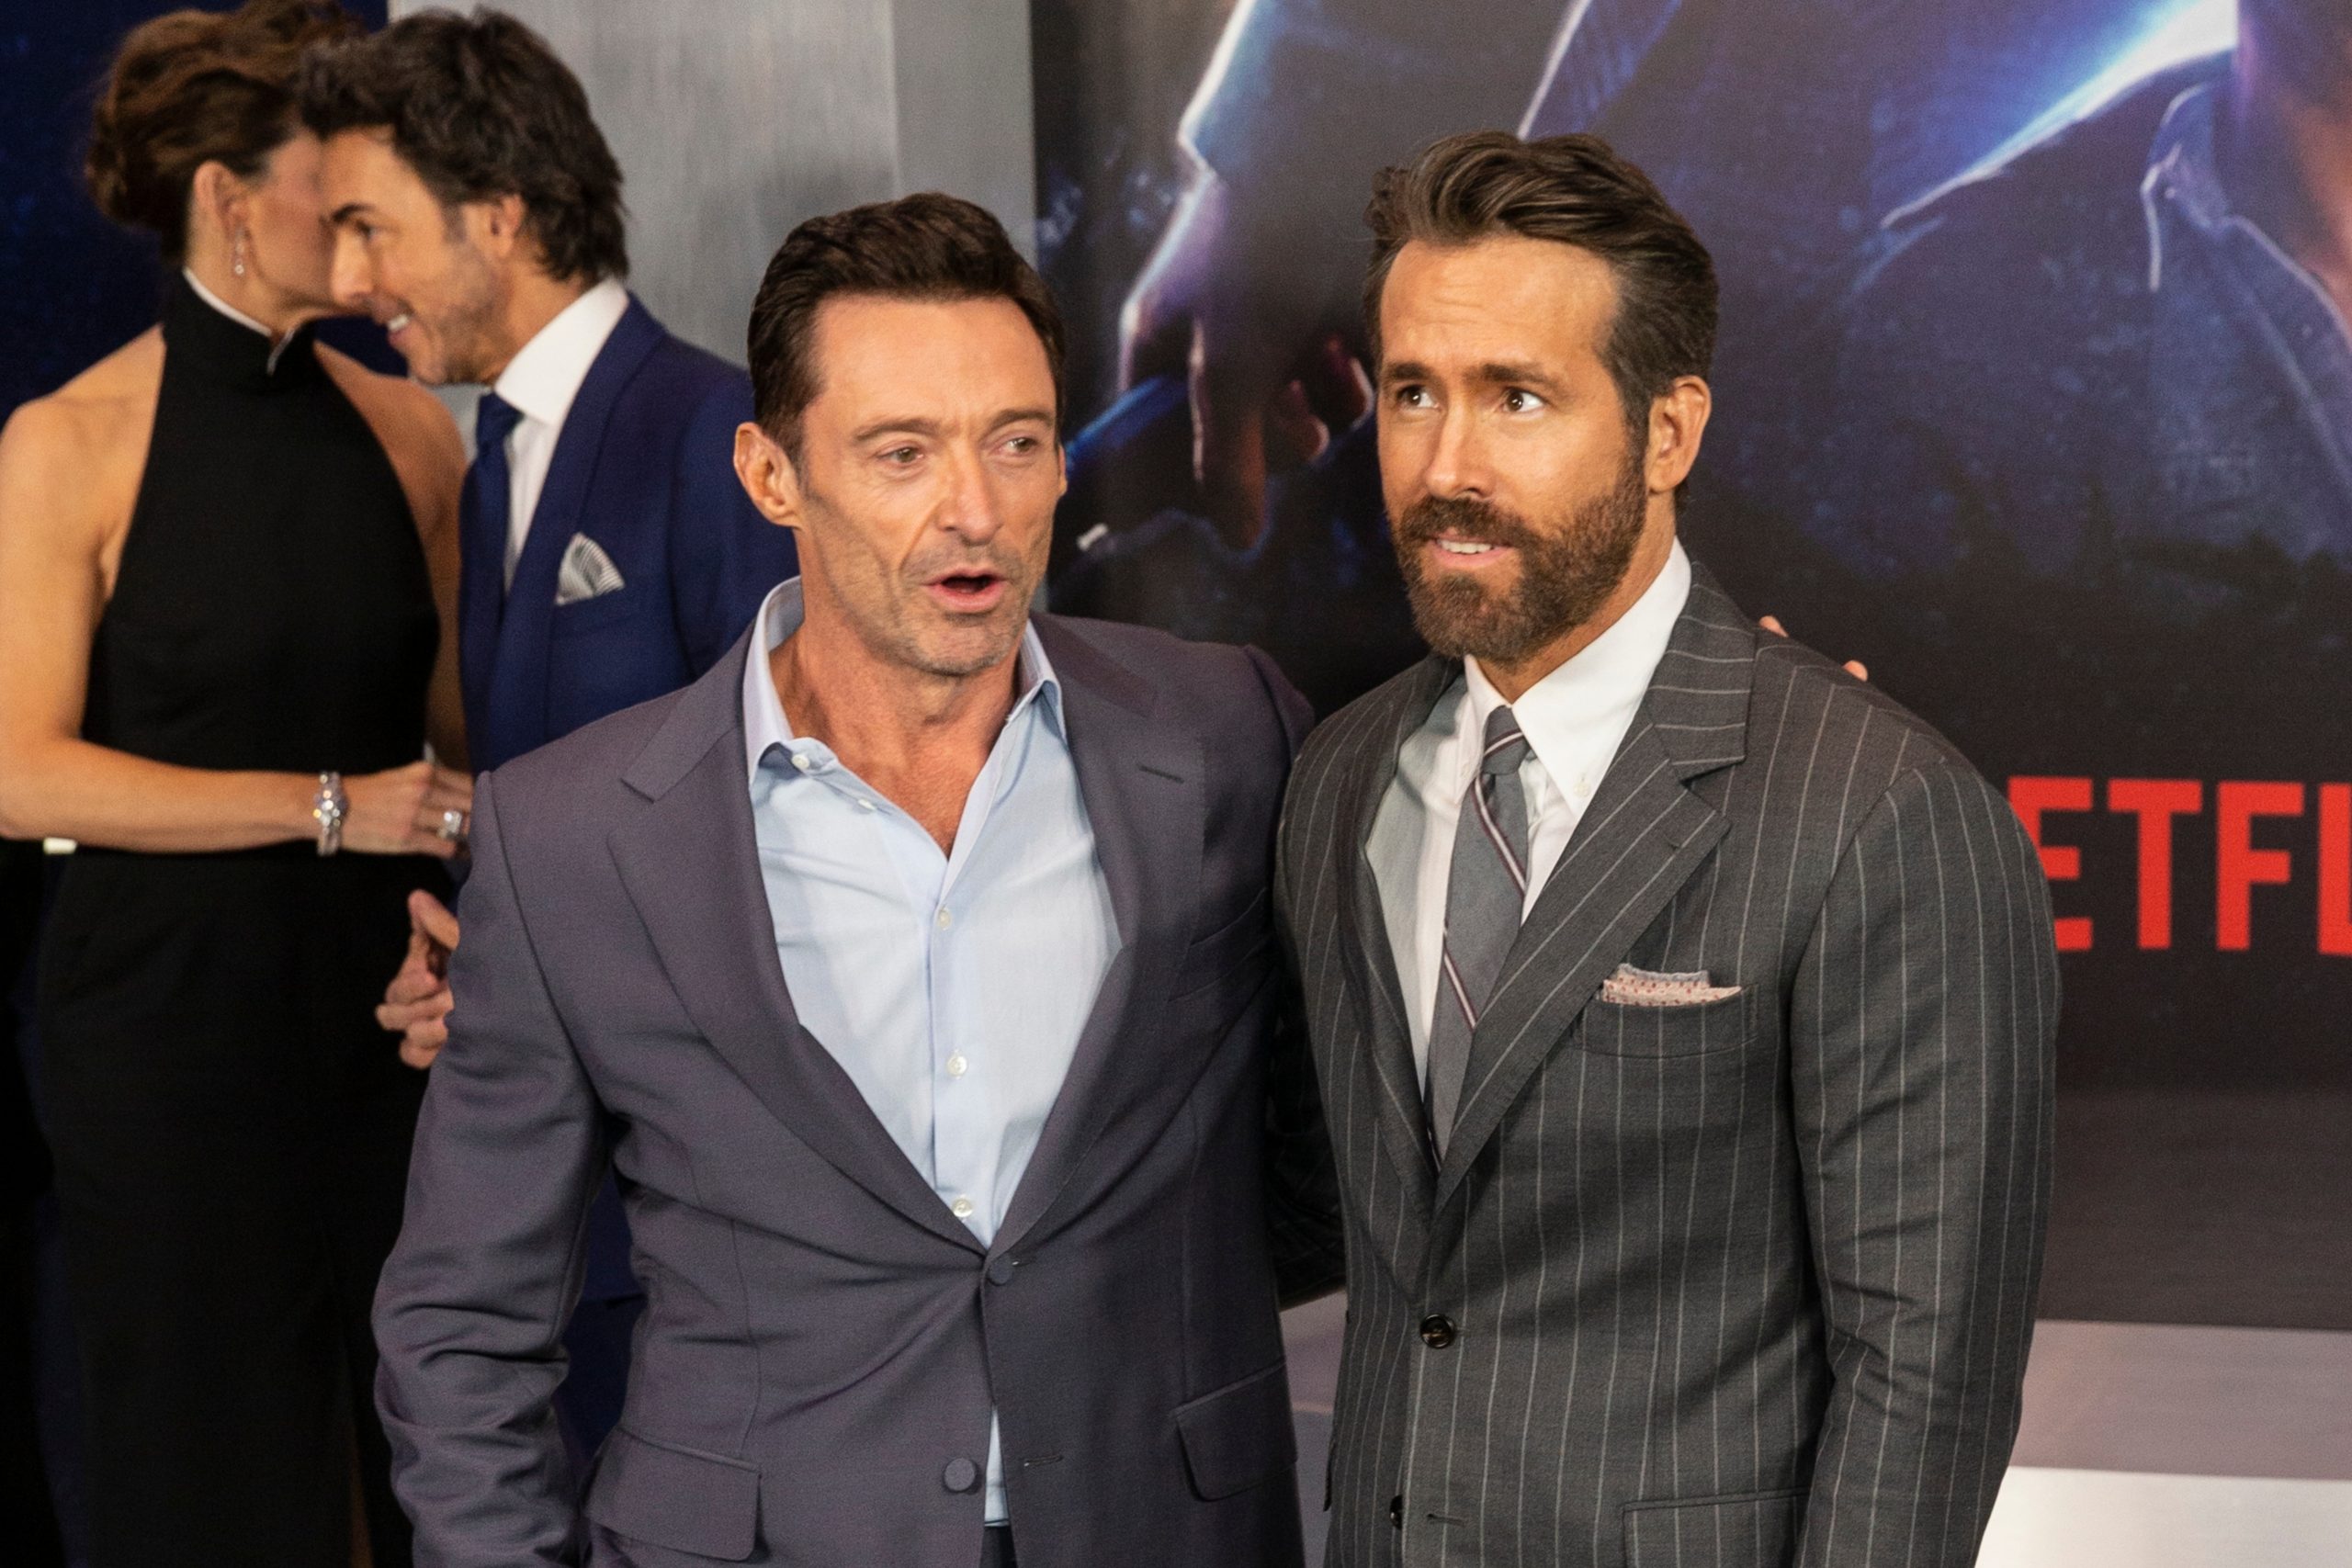 Watch: Celebrity Hugh Jackman asks Academy not to nominate Ryan Reynolds for Good Afternoon, fans respond